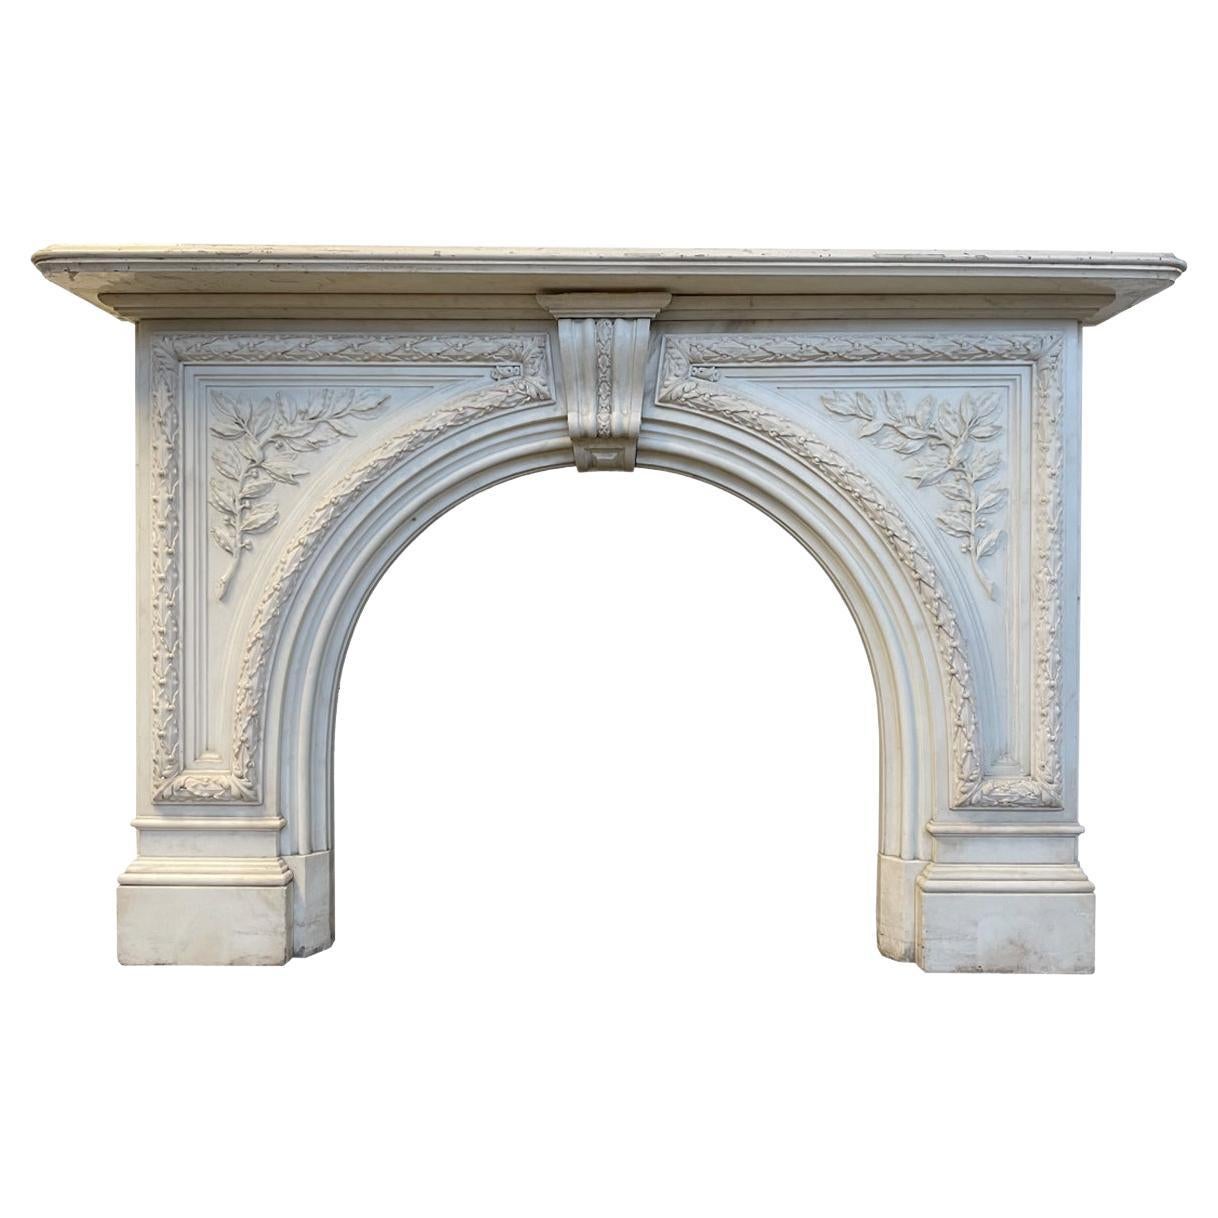 Large Antique Victorian Arched White Statuary Marble Surround